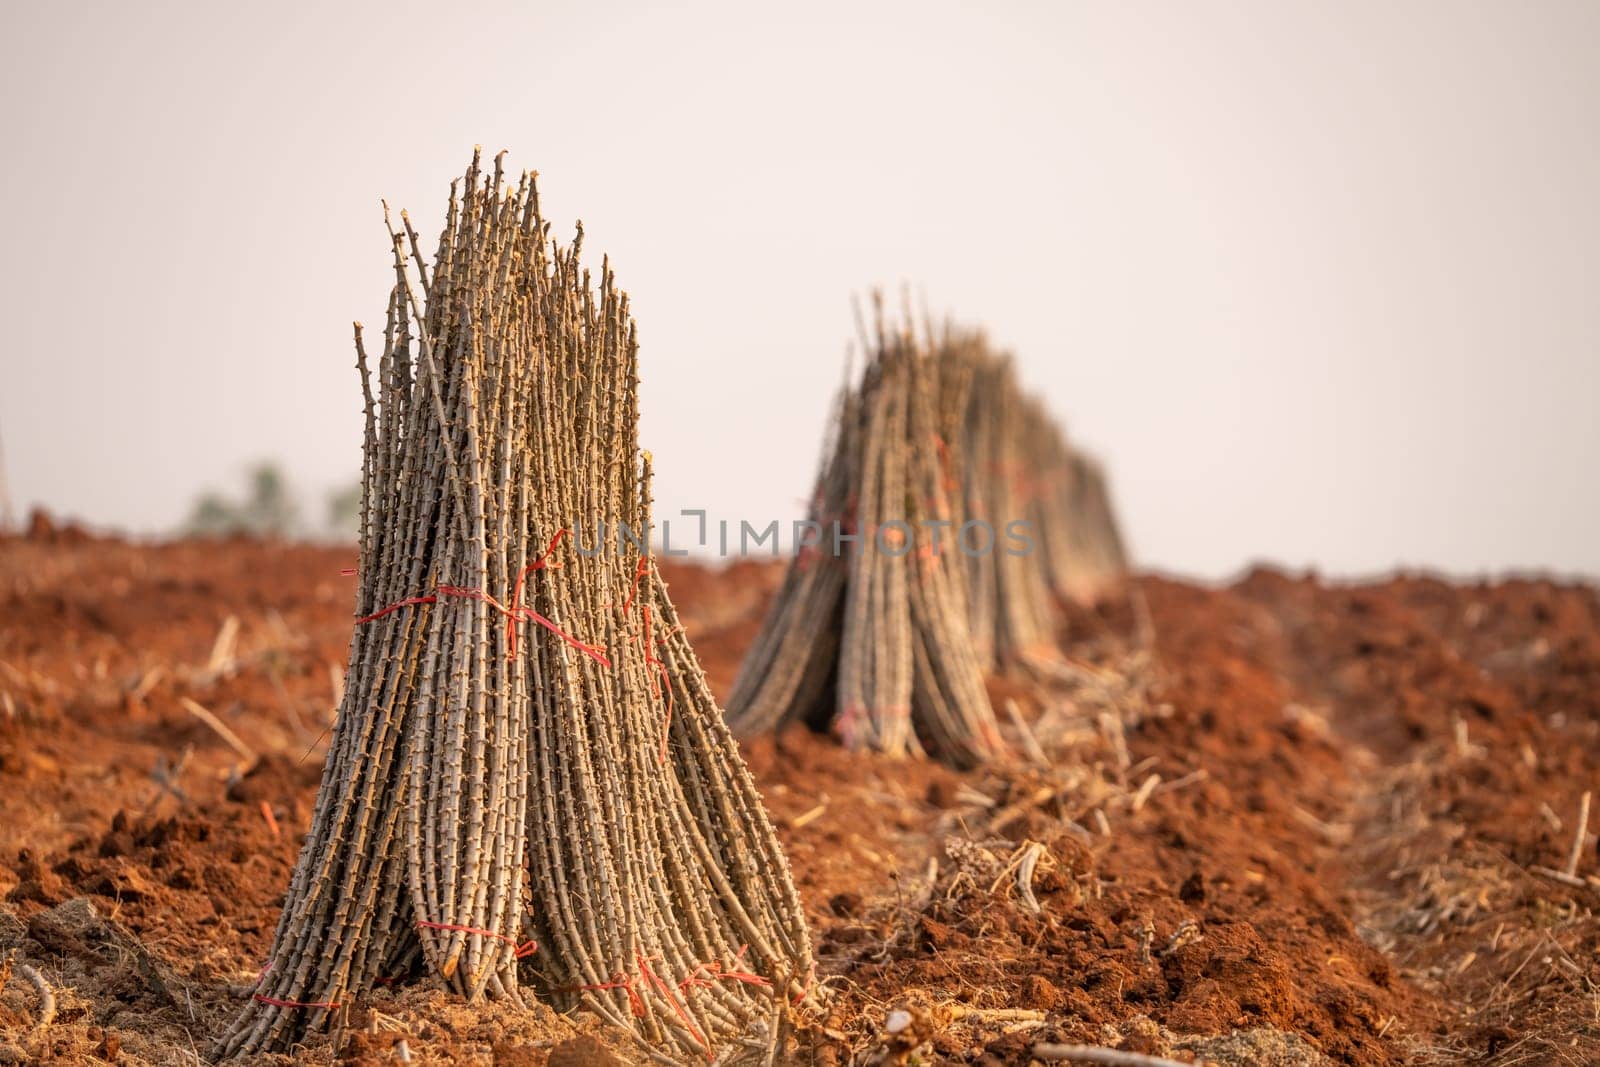 Cassava farm. Manioc or tapioca plant field. Bundle of cassava trees in cassava farm. The plowed field for planting crops. Sustainable farming. Agriculture in developing countries. Staple food crop. by Fahroni